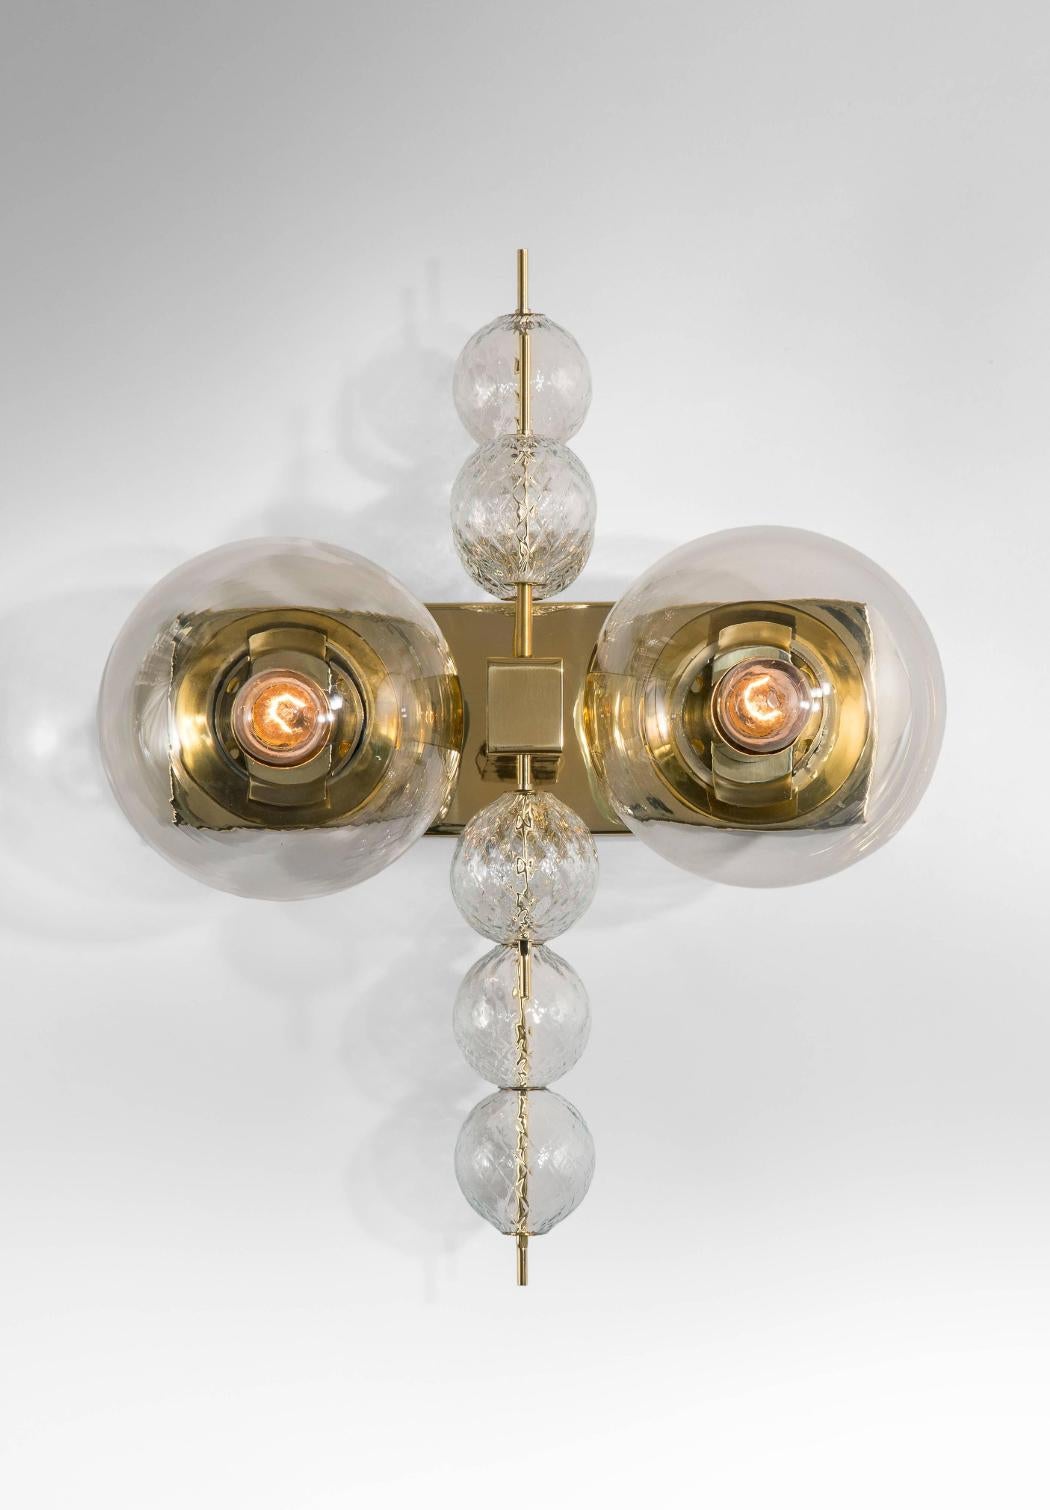 Mid-Century Modern Set Midcentury Hotel Wall Chandeliers with Brass Fixture, European, 1970s For Sale